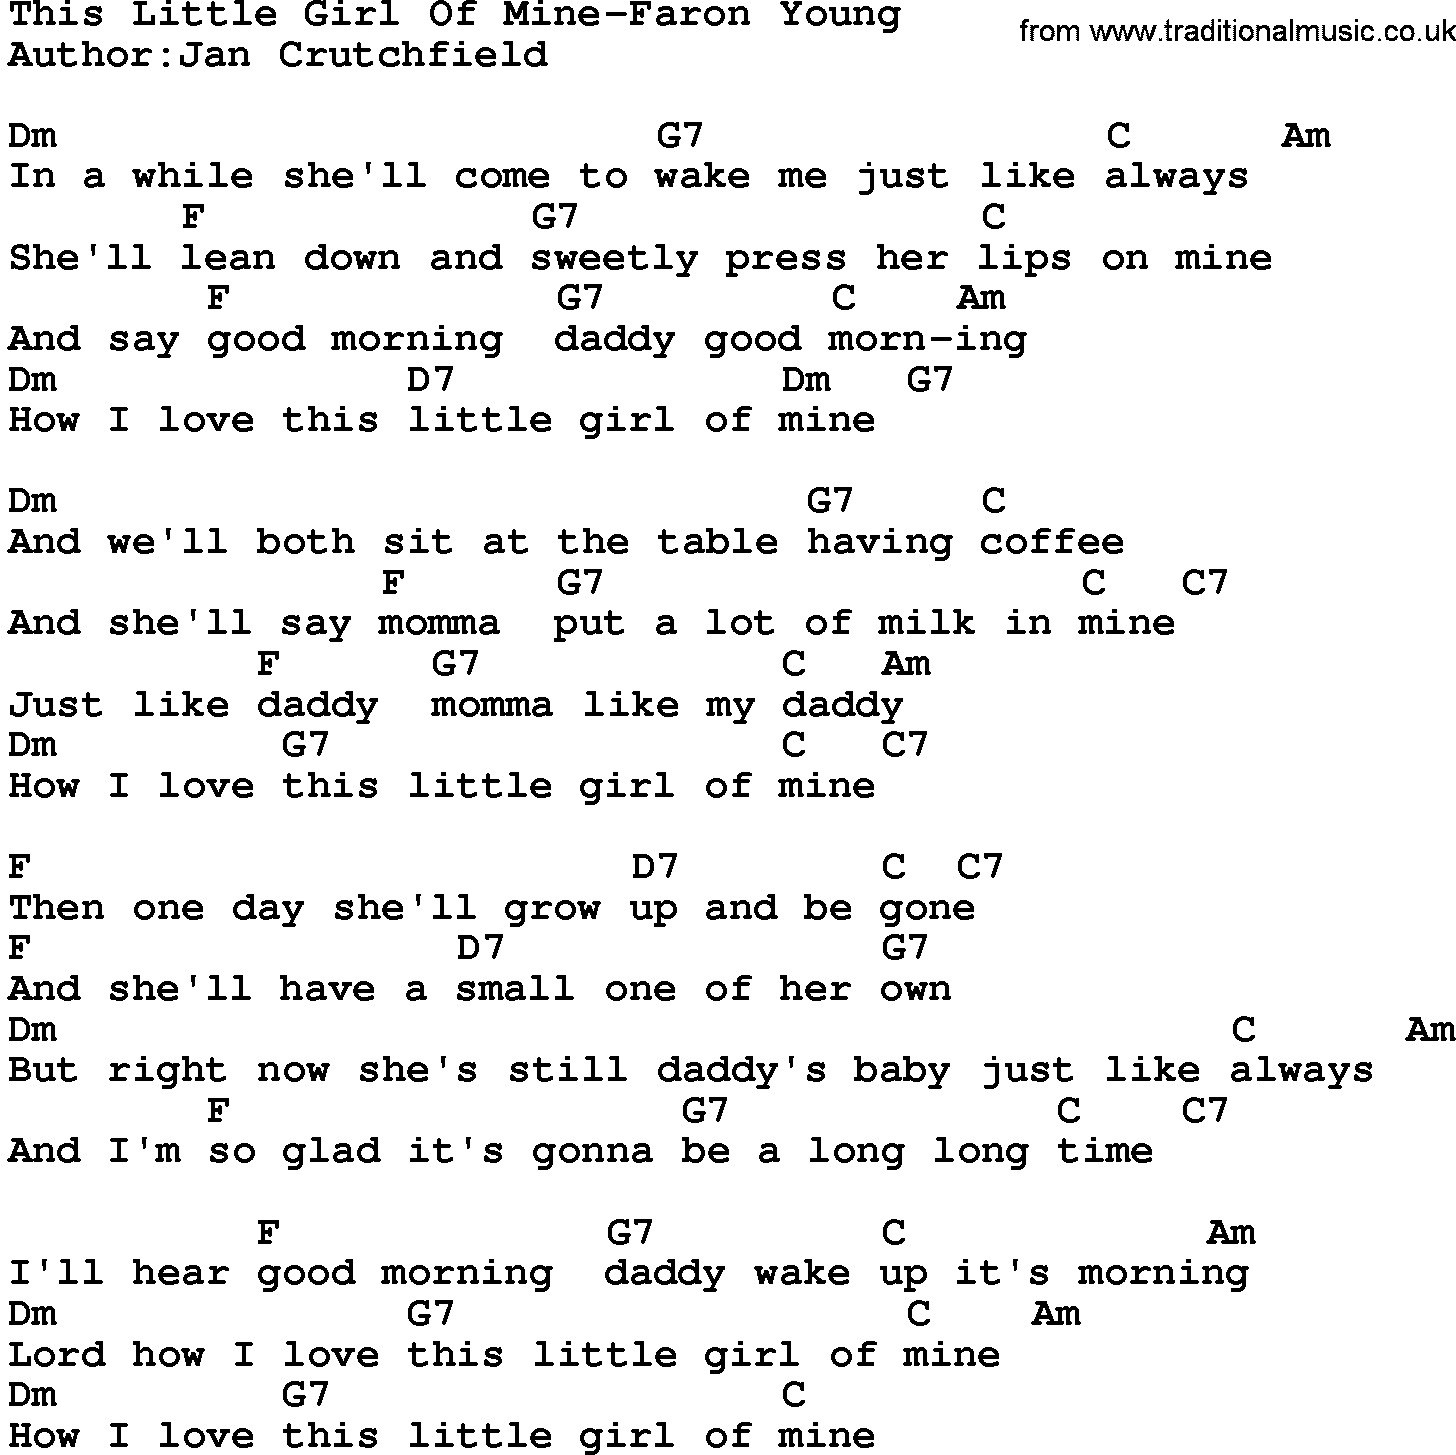 Country music song: This Little Girl Of Mine-Faron Young lyrics and chords